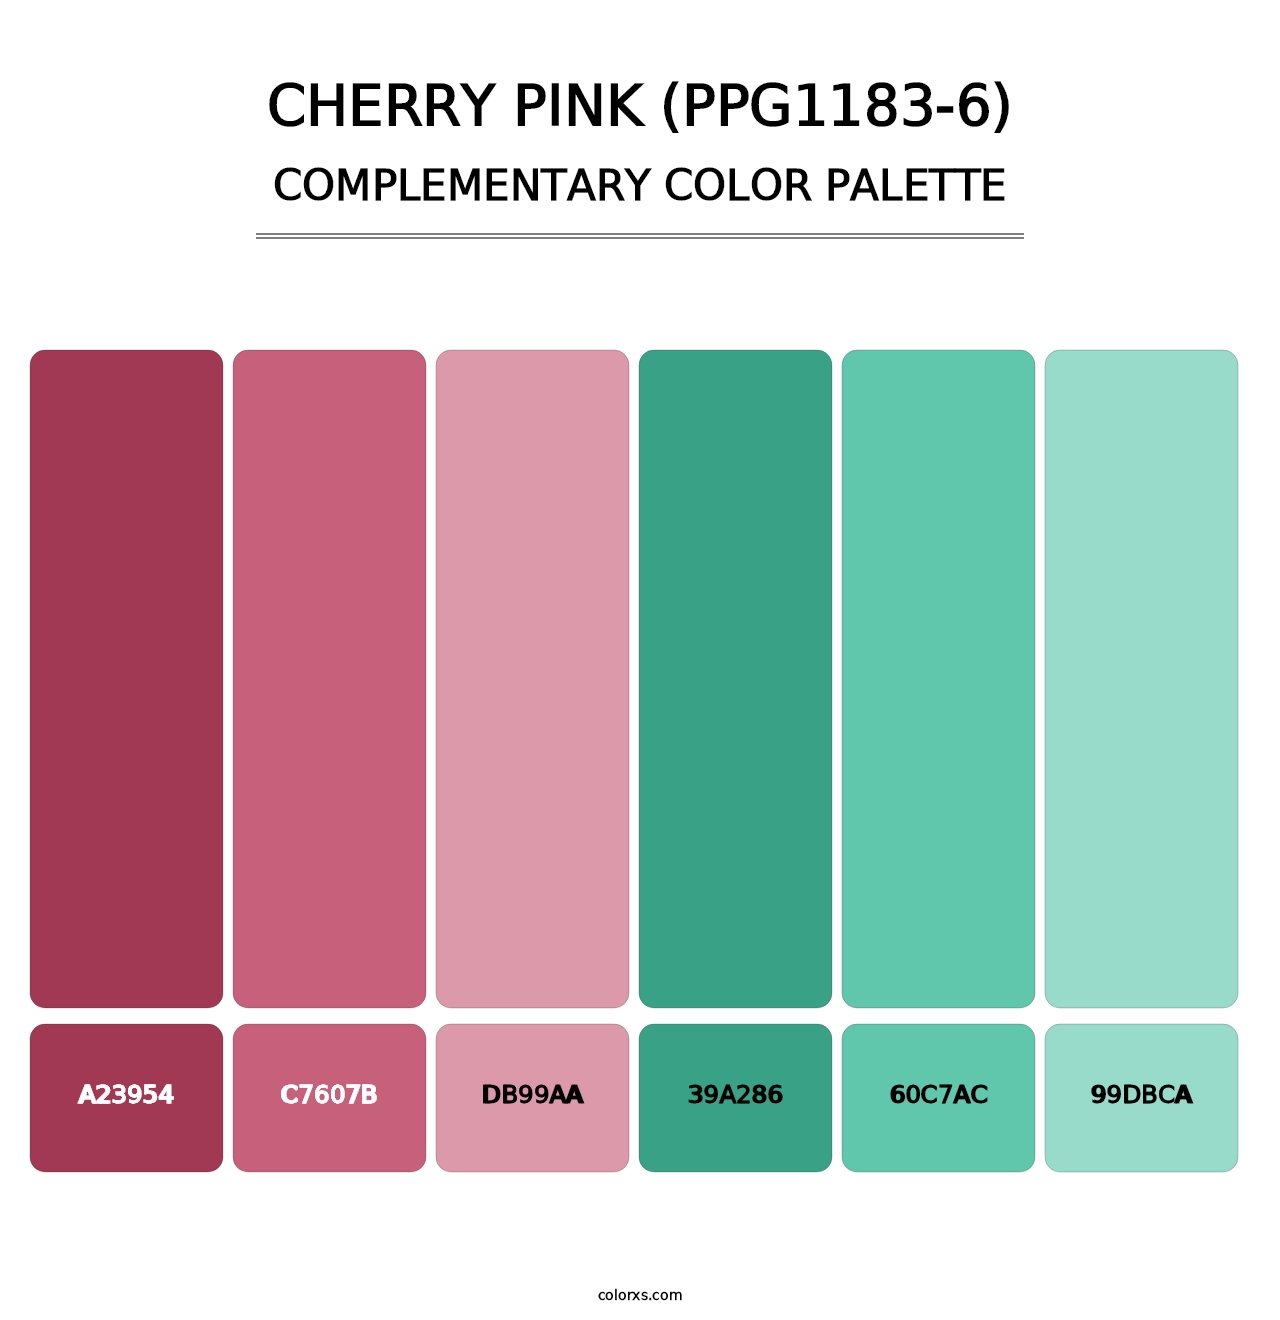 Cherry Pink (PPG1183-6) - Complementary Color Palette